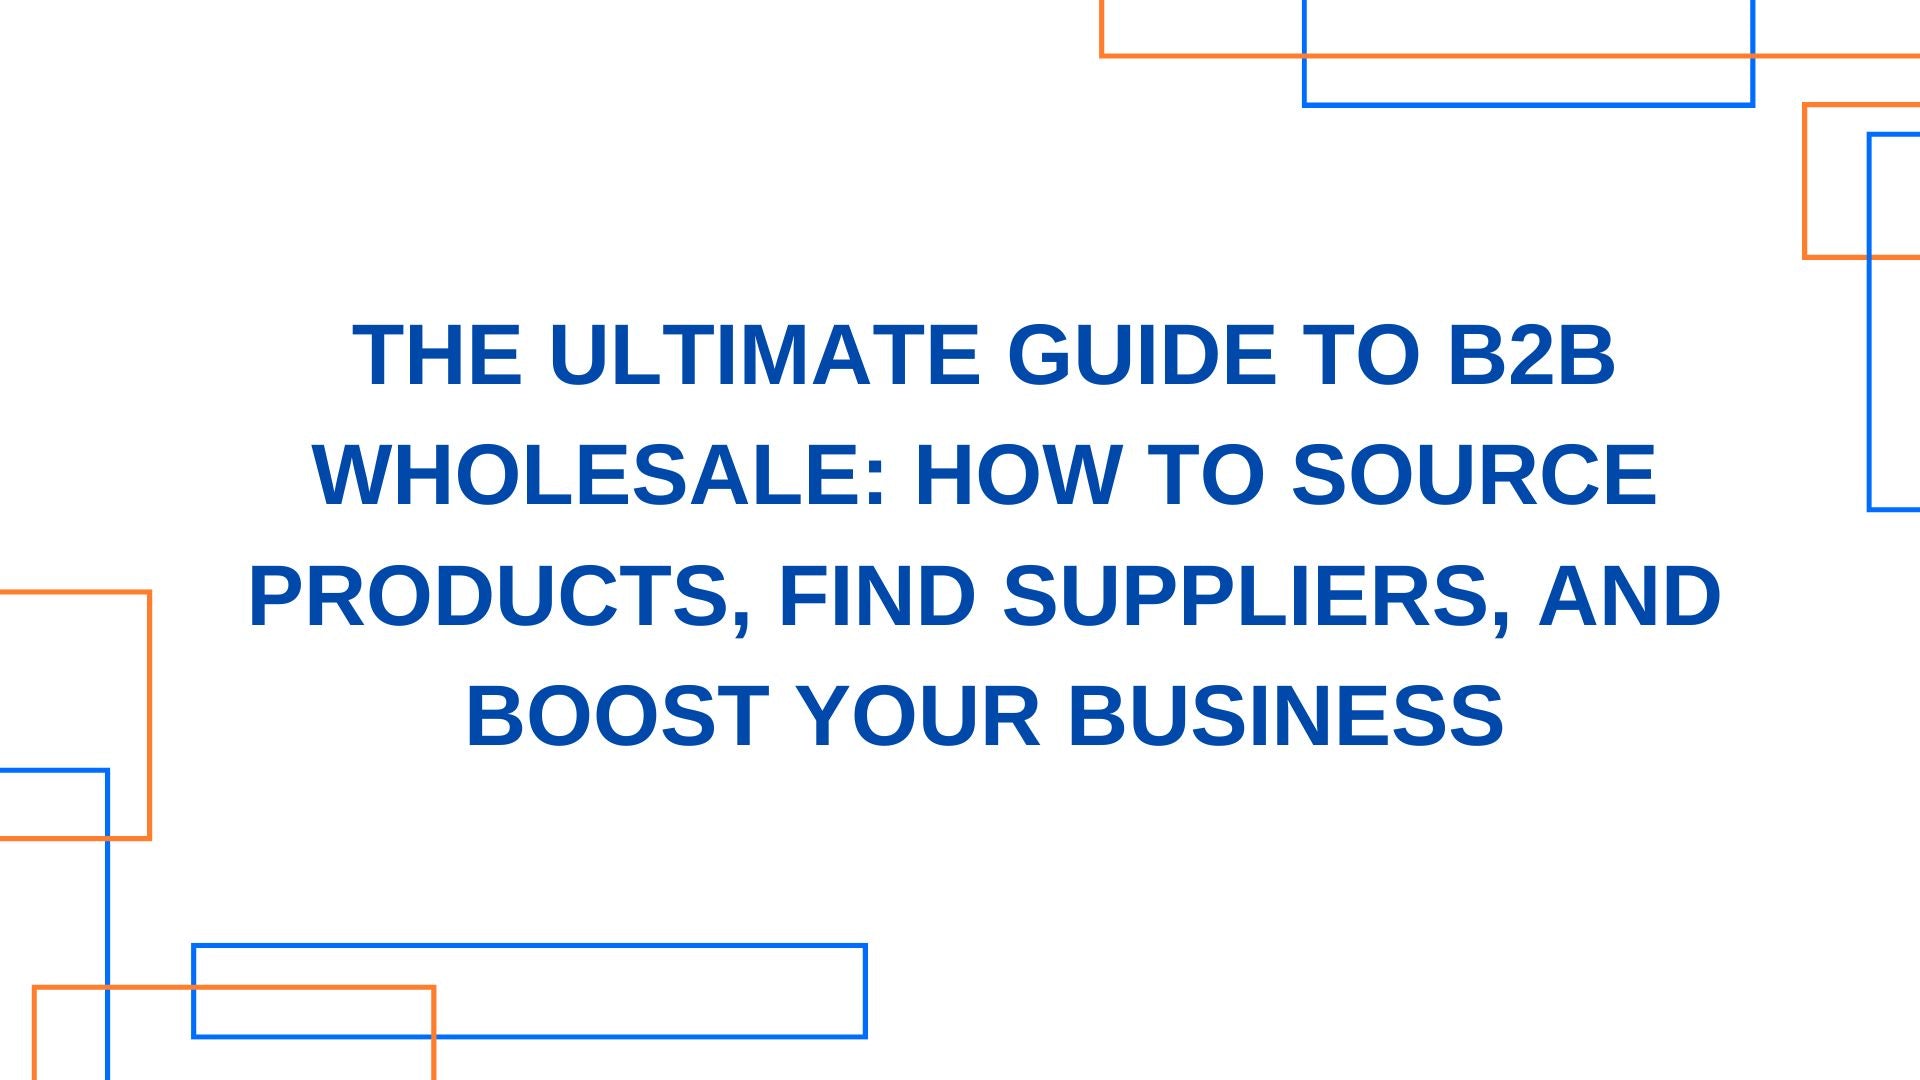 The Ultimate Guide to B2B Wholesale: How to Source Products, Find Suppliers, and Boost Your Business